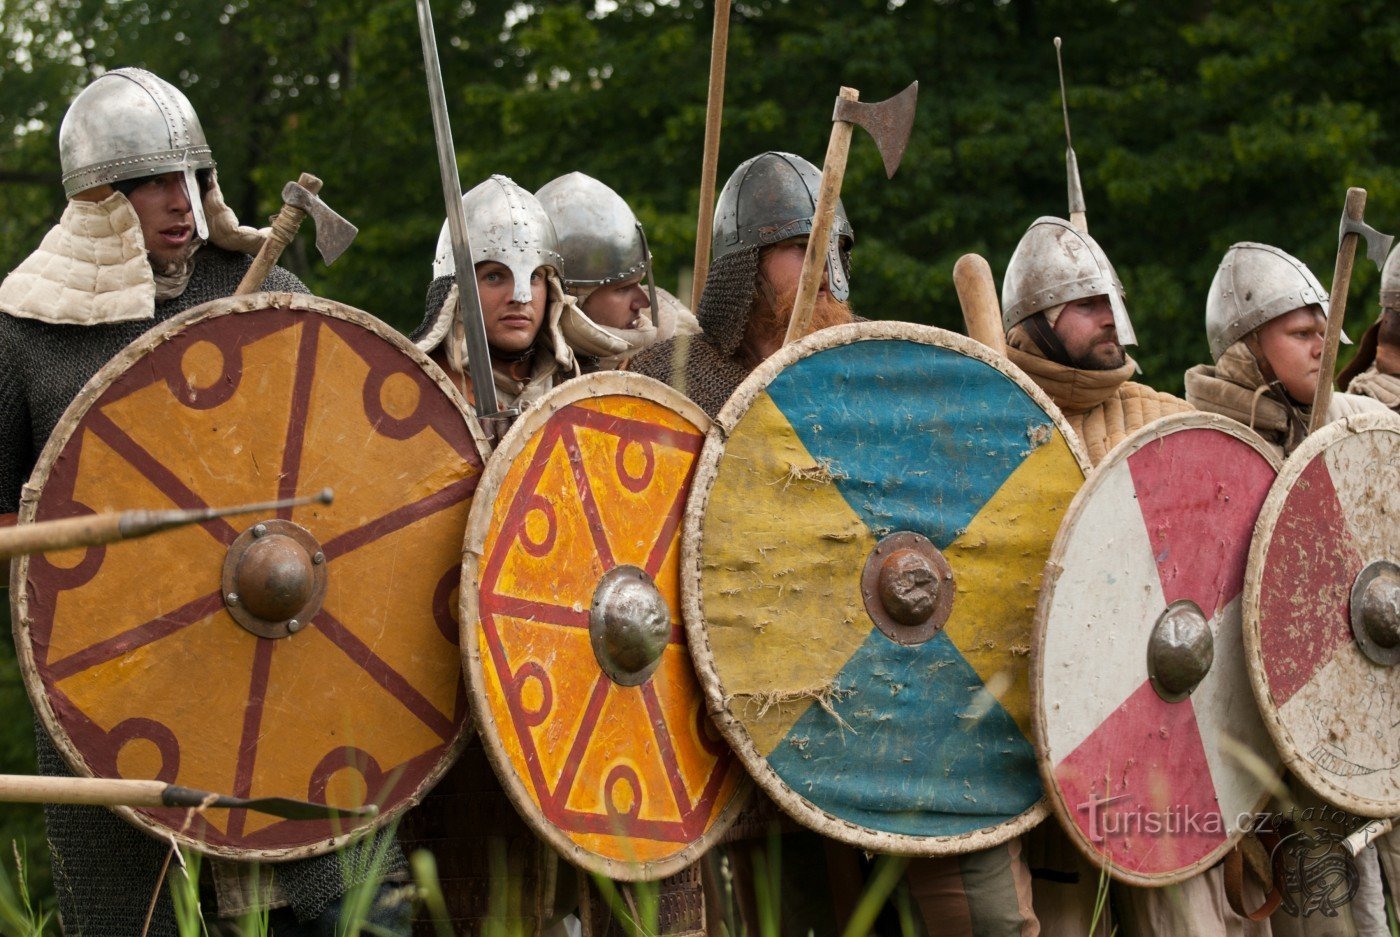 Early Medieval Battle of Rogar - Battle of Hedeby